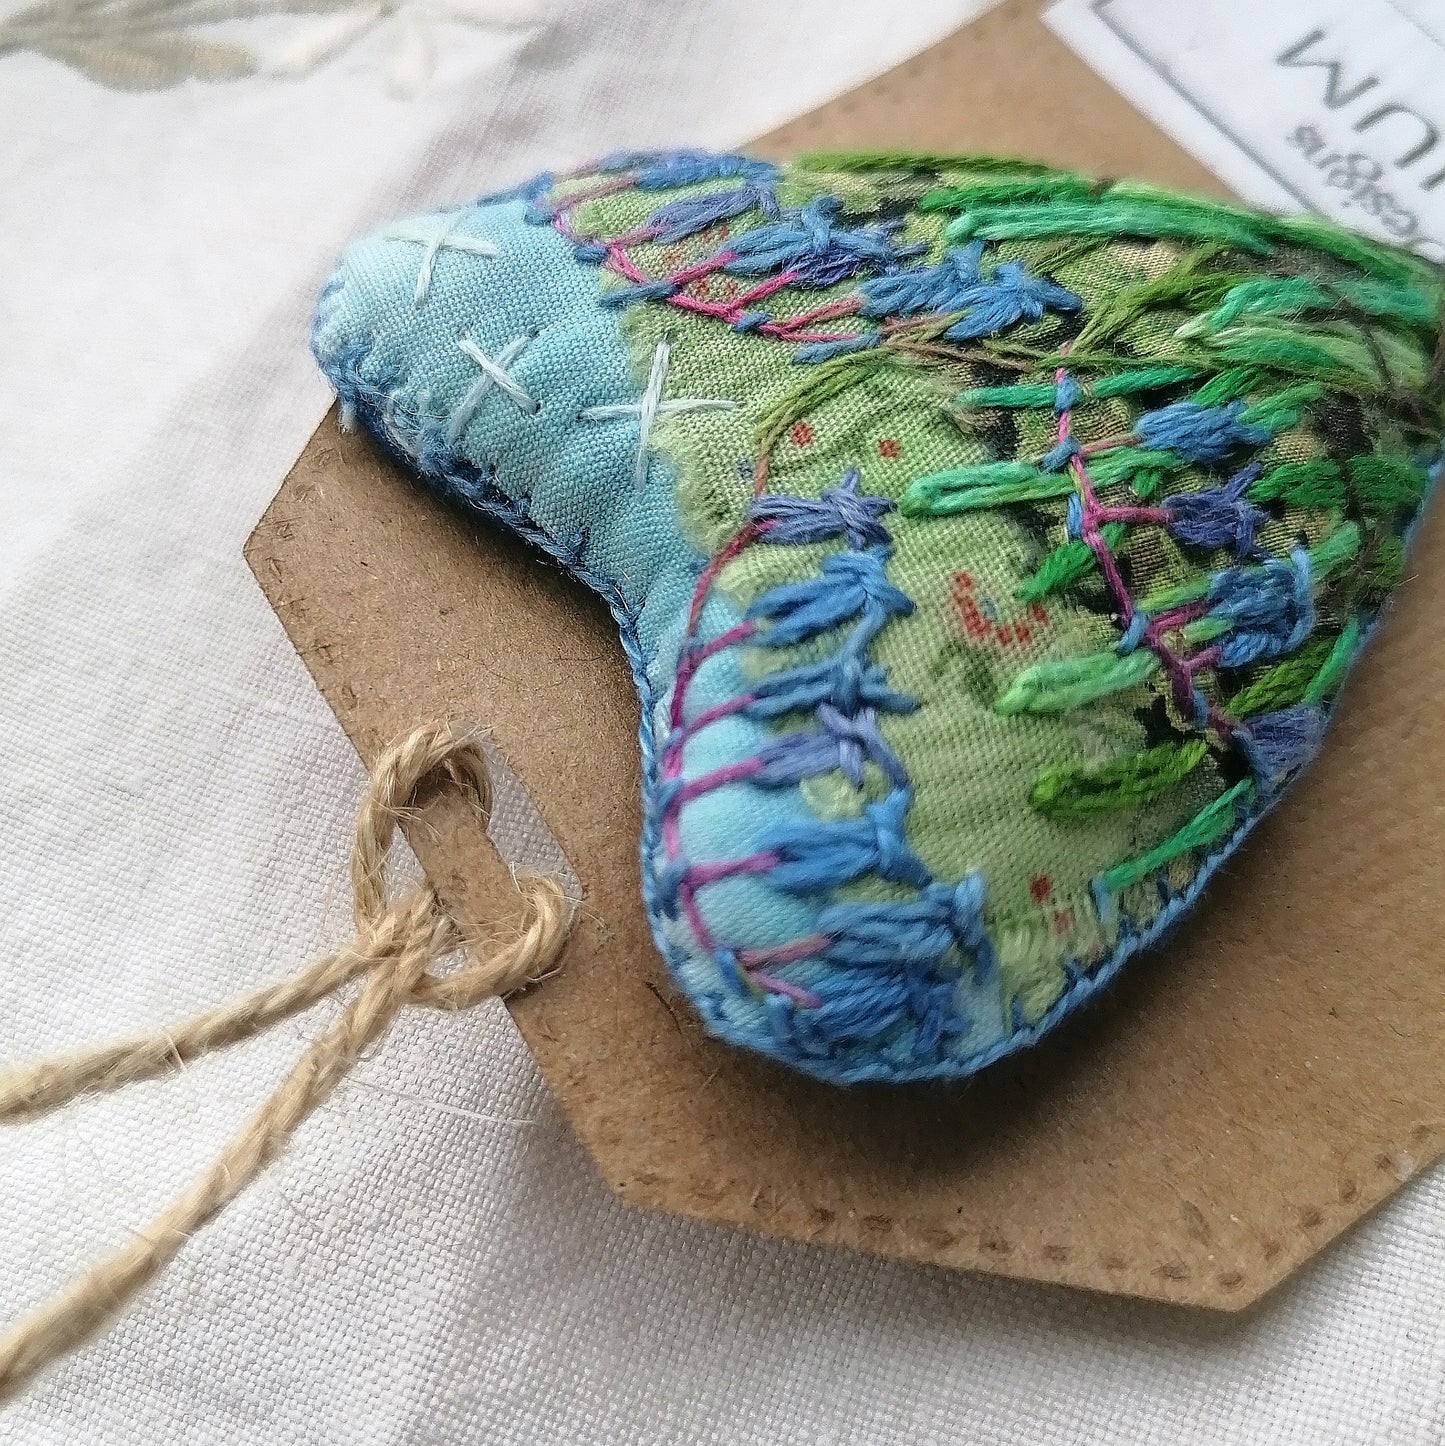 Stitched BLUEBELL Heart Brooches